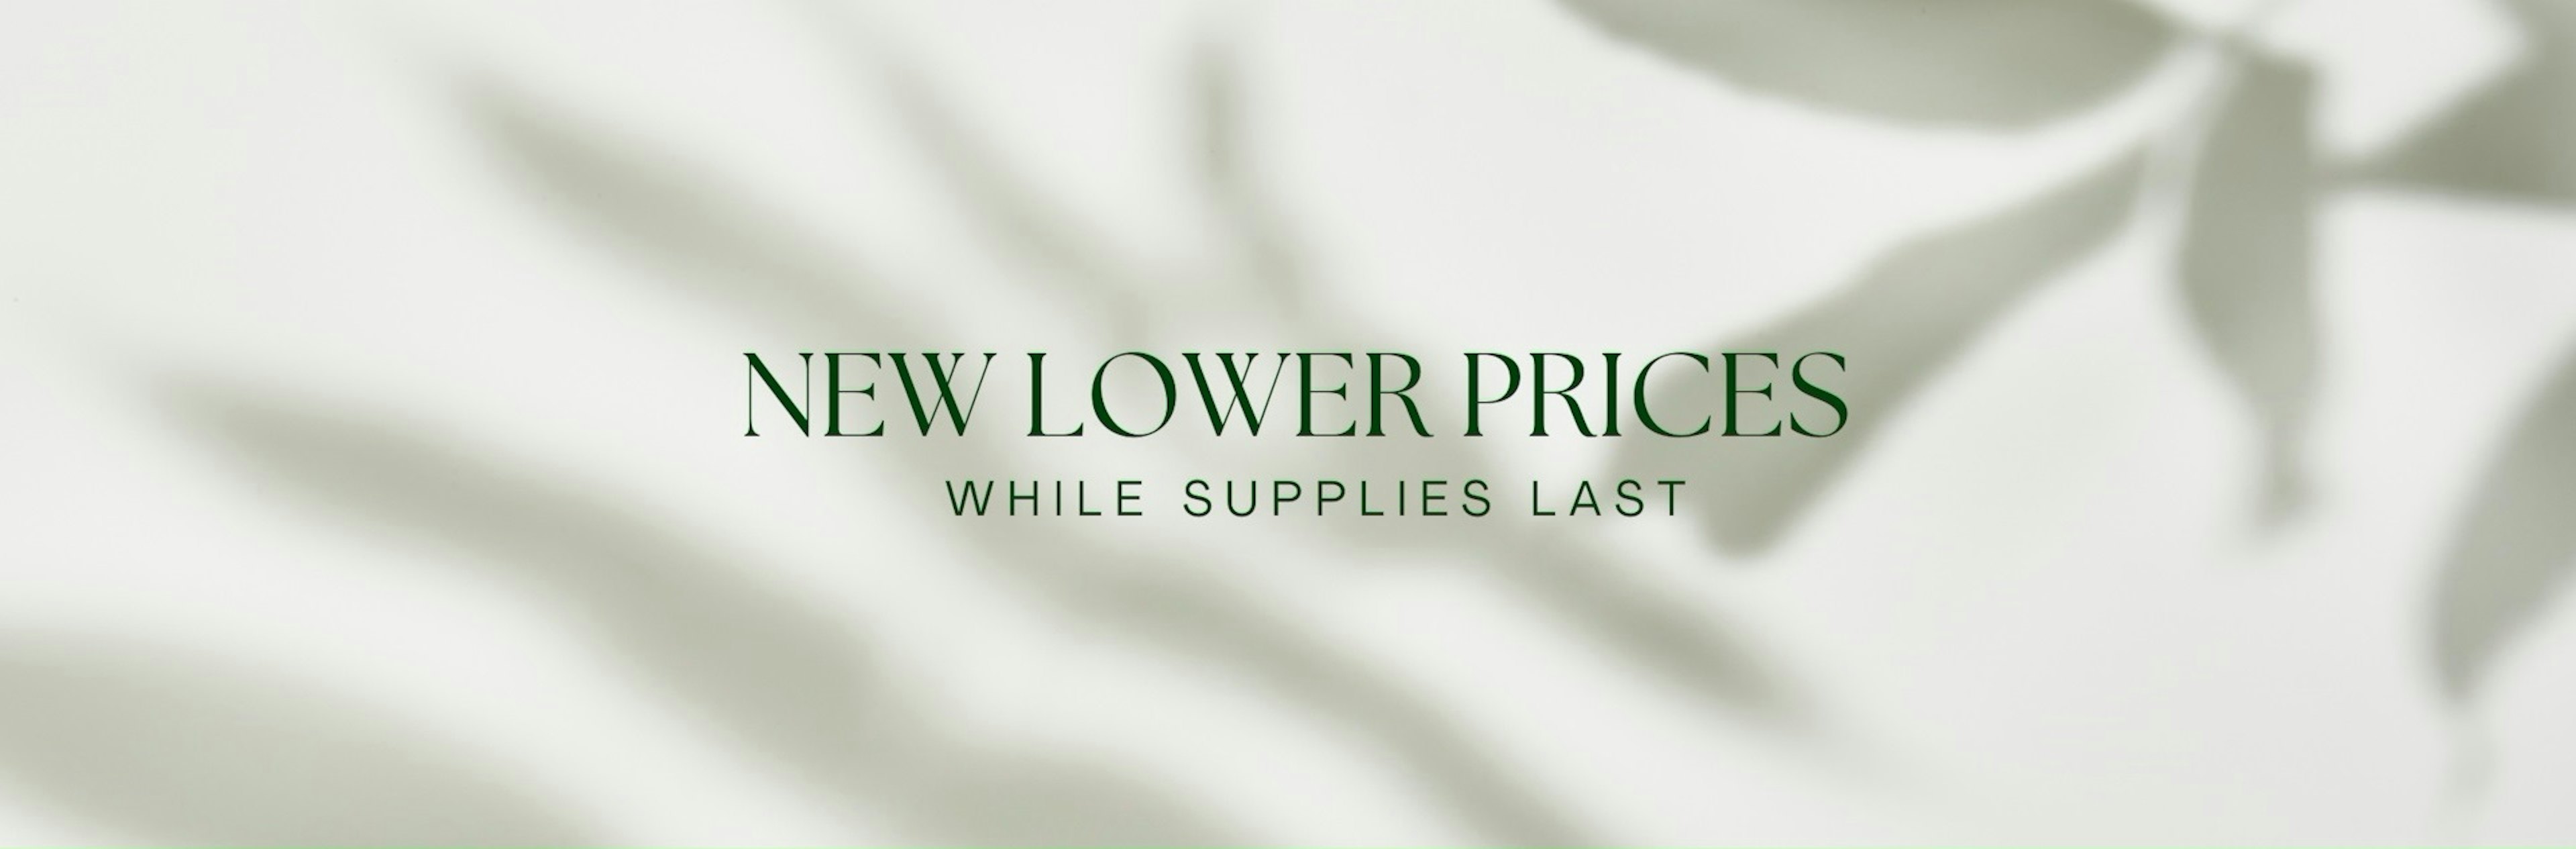 New Lower Prices (While Supplies Last)